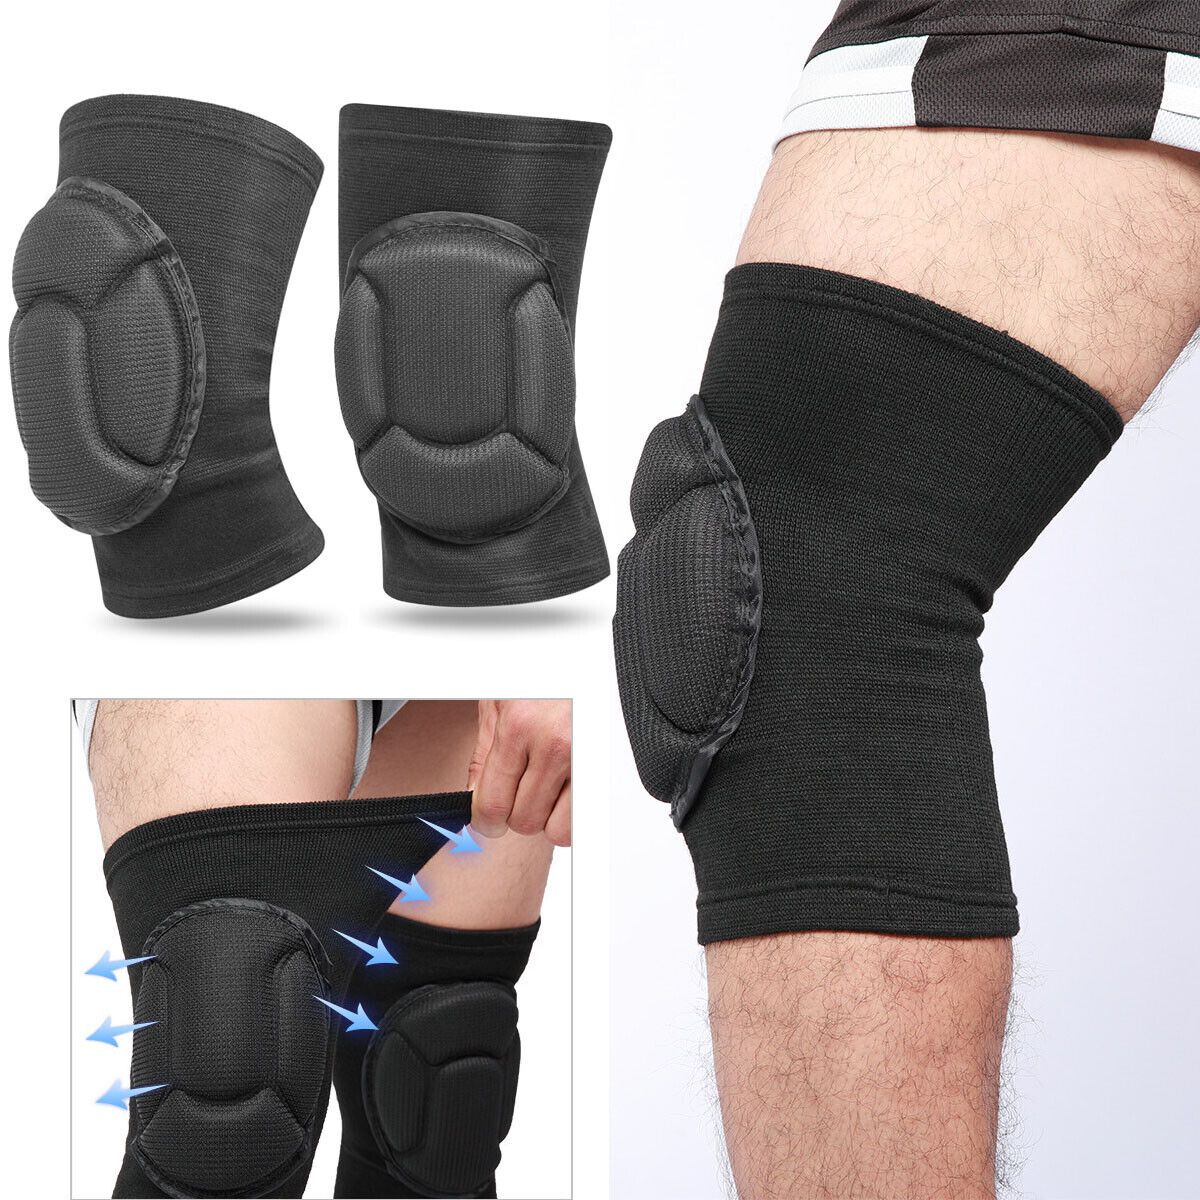 2 x Professional Knee Pads For Sport Work Flooring Construction Leg Protector US Unbranded Does Not Apply - фотография #2